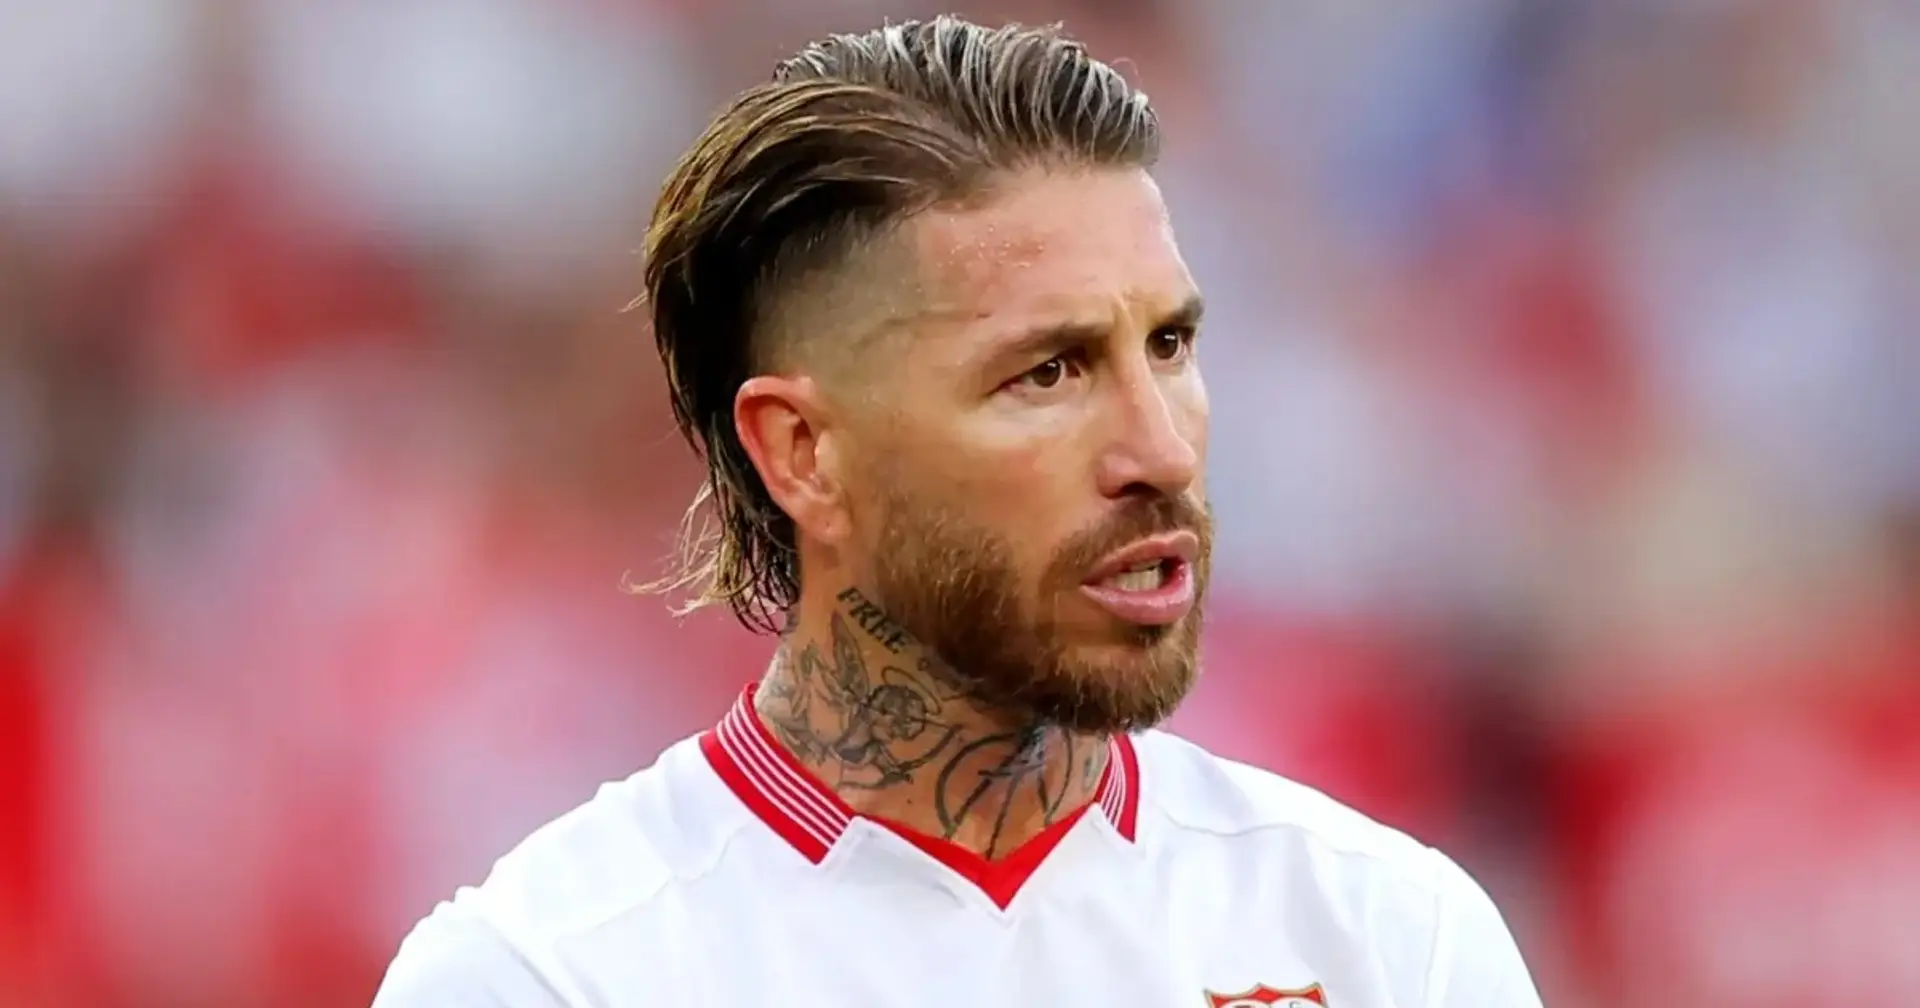 Is Sergio Ramos set to join future MLS side? He answers